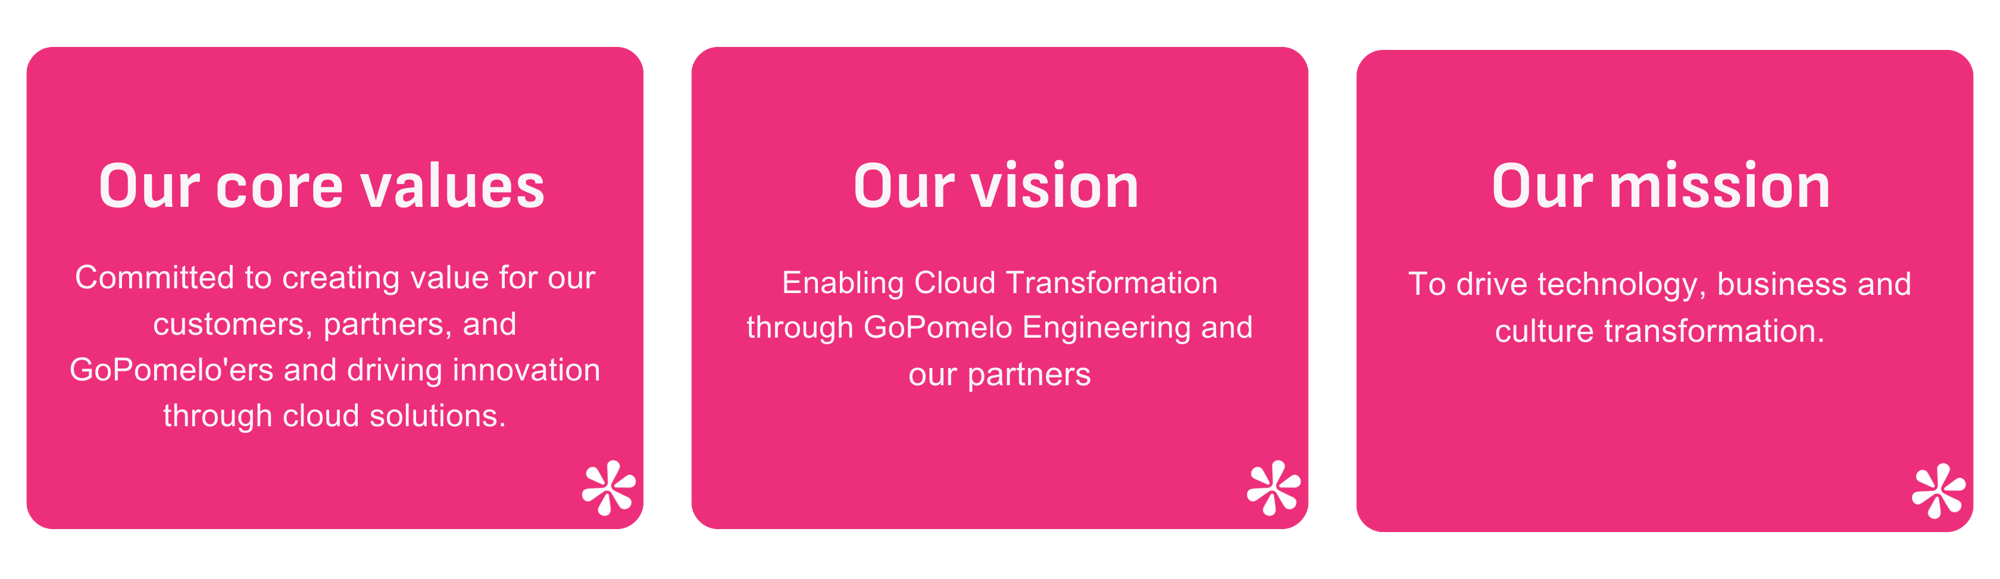 Our core values Committed to creating value for our customers, partners, and GoPomeloers and driving innovation through cloud solutions.